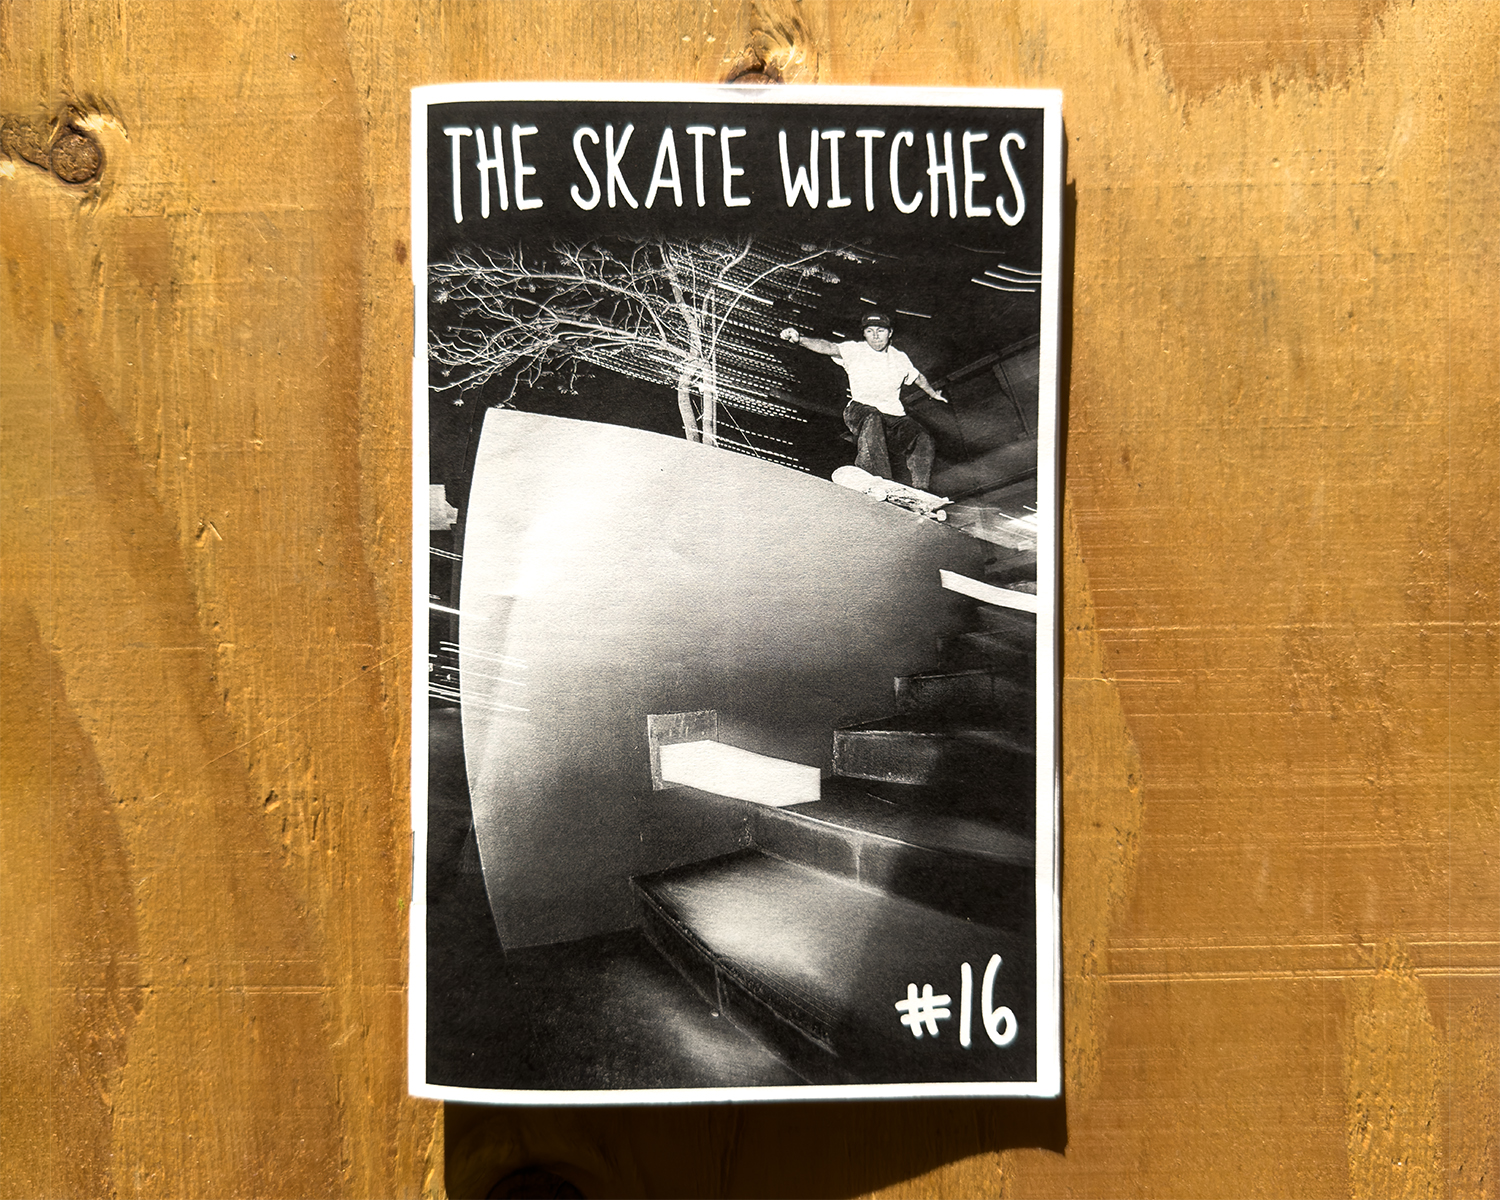 The Skate Witches